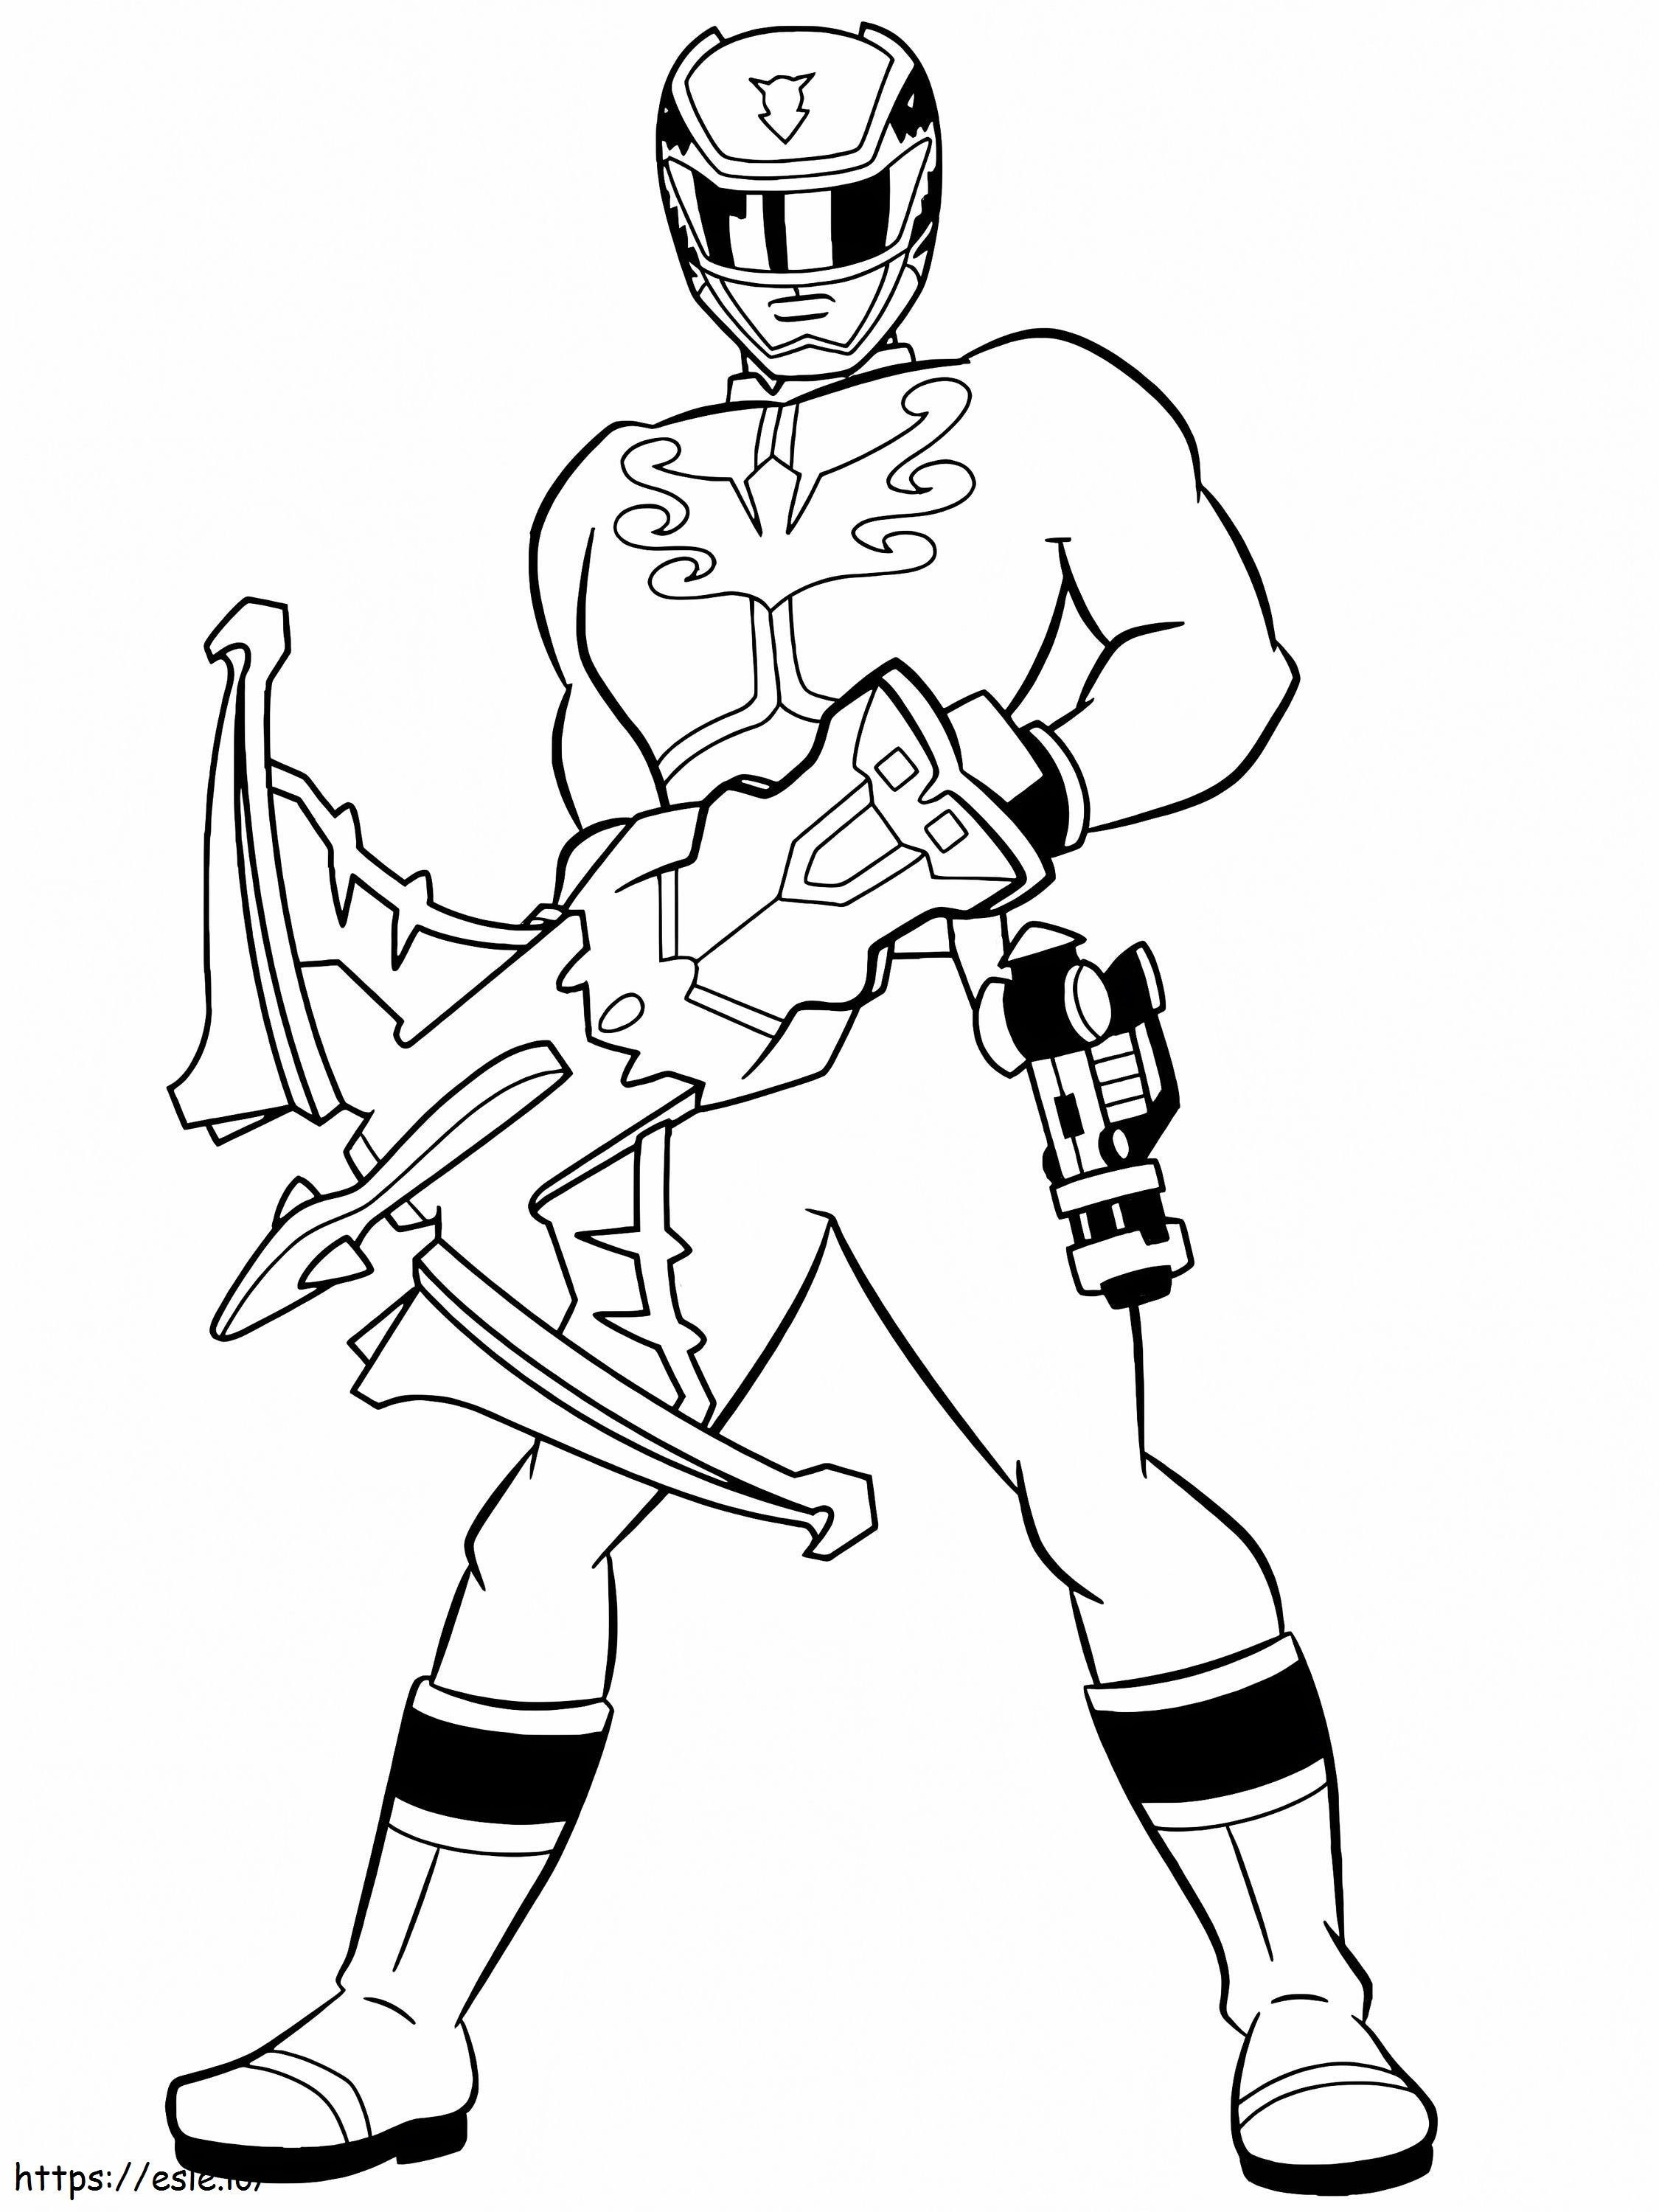 Power Rangers Is Awesome coloring page